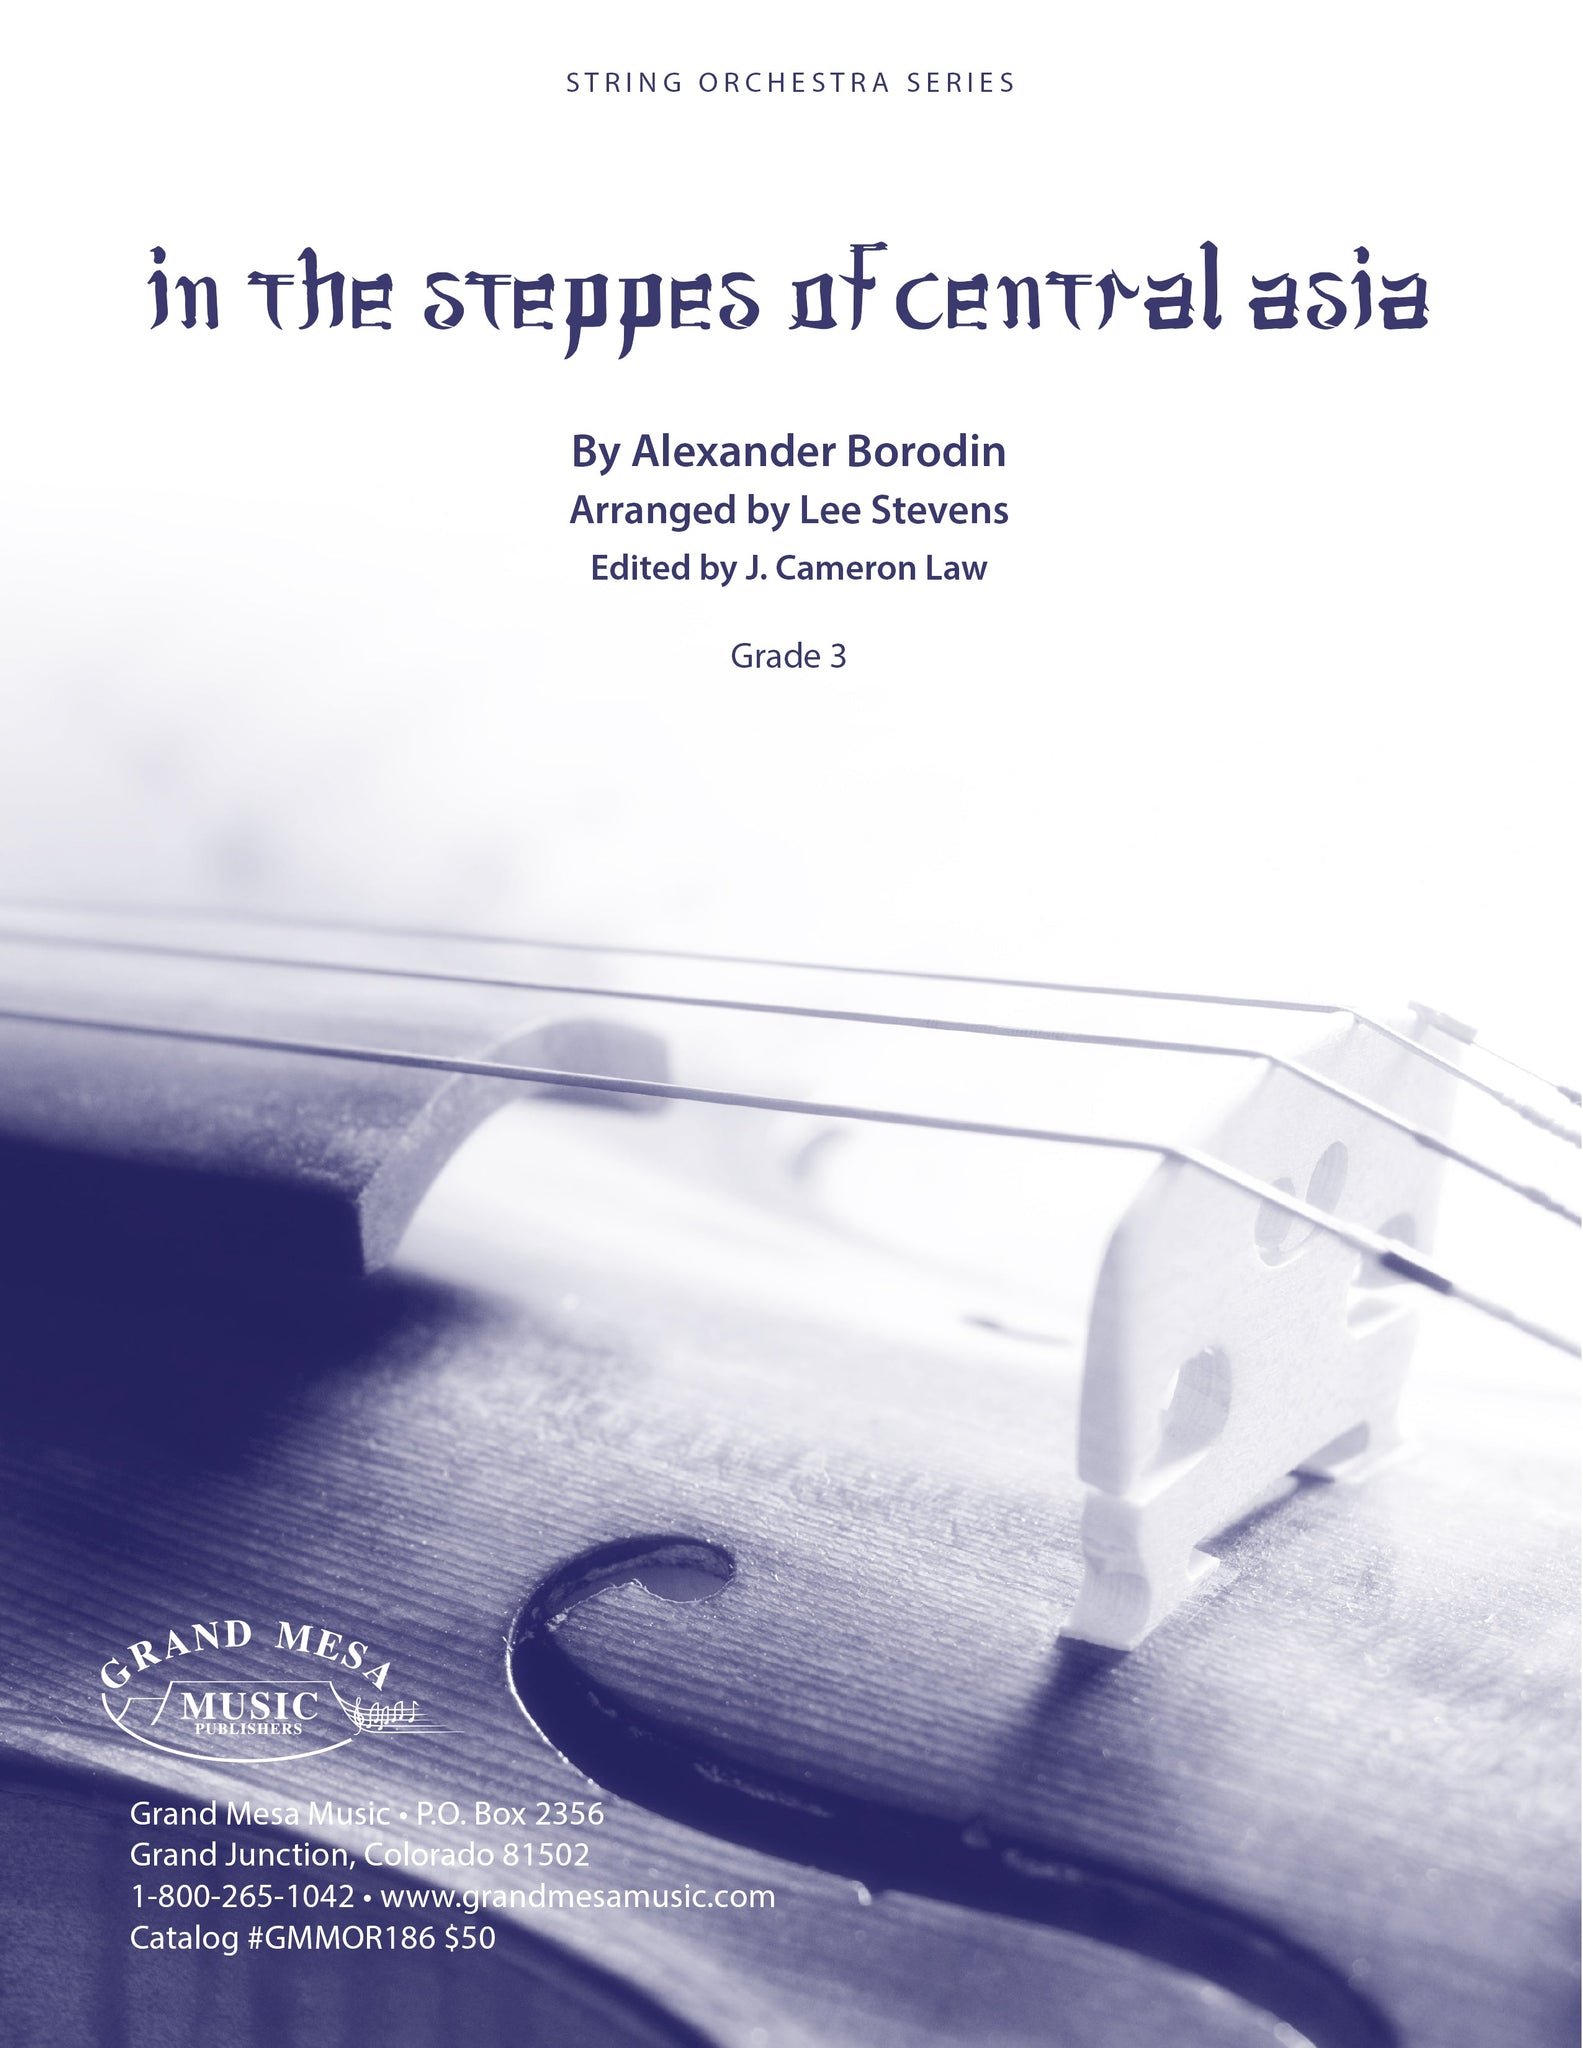 Strings sheet music cover of In the Steppes of Central Asia, composed by Alexander Borodin, arranged by Lee Stevens.